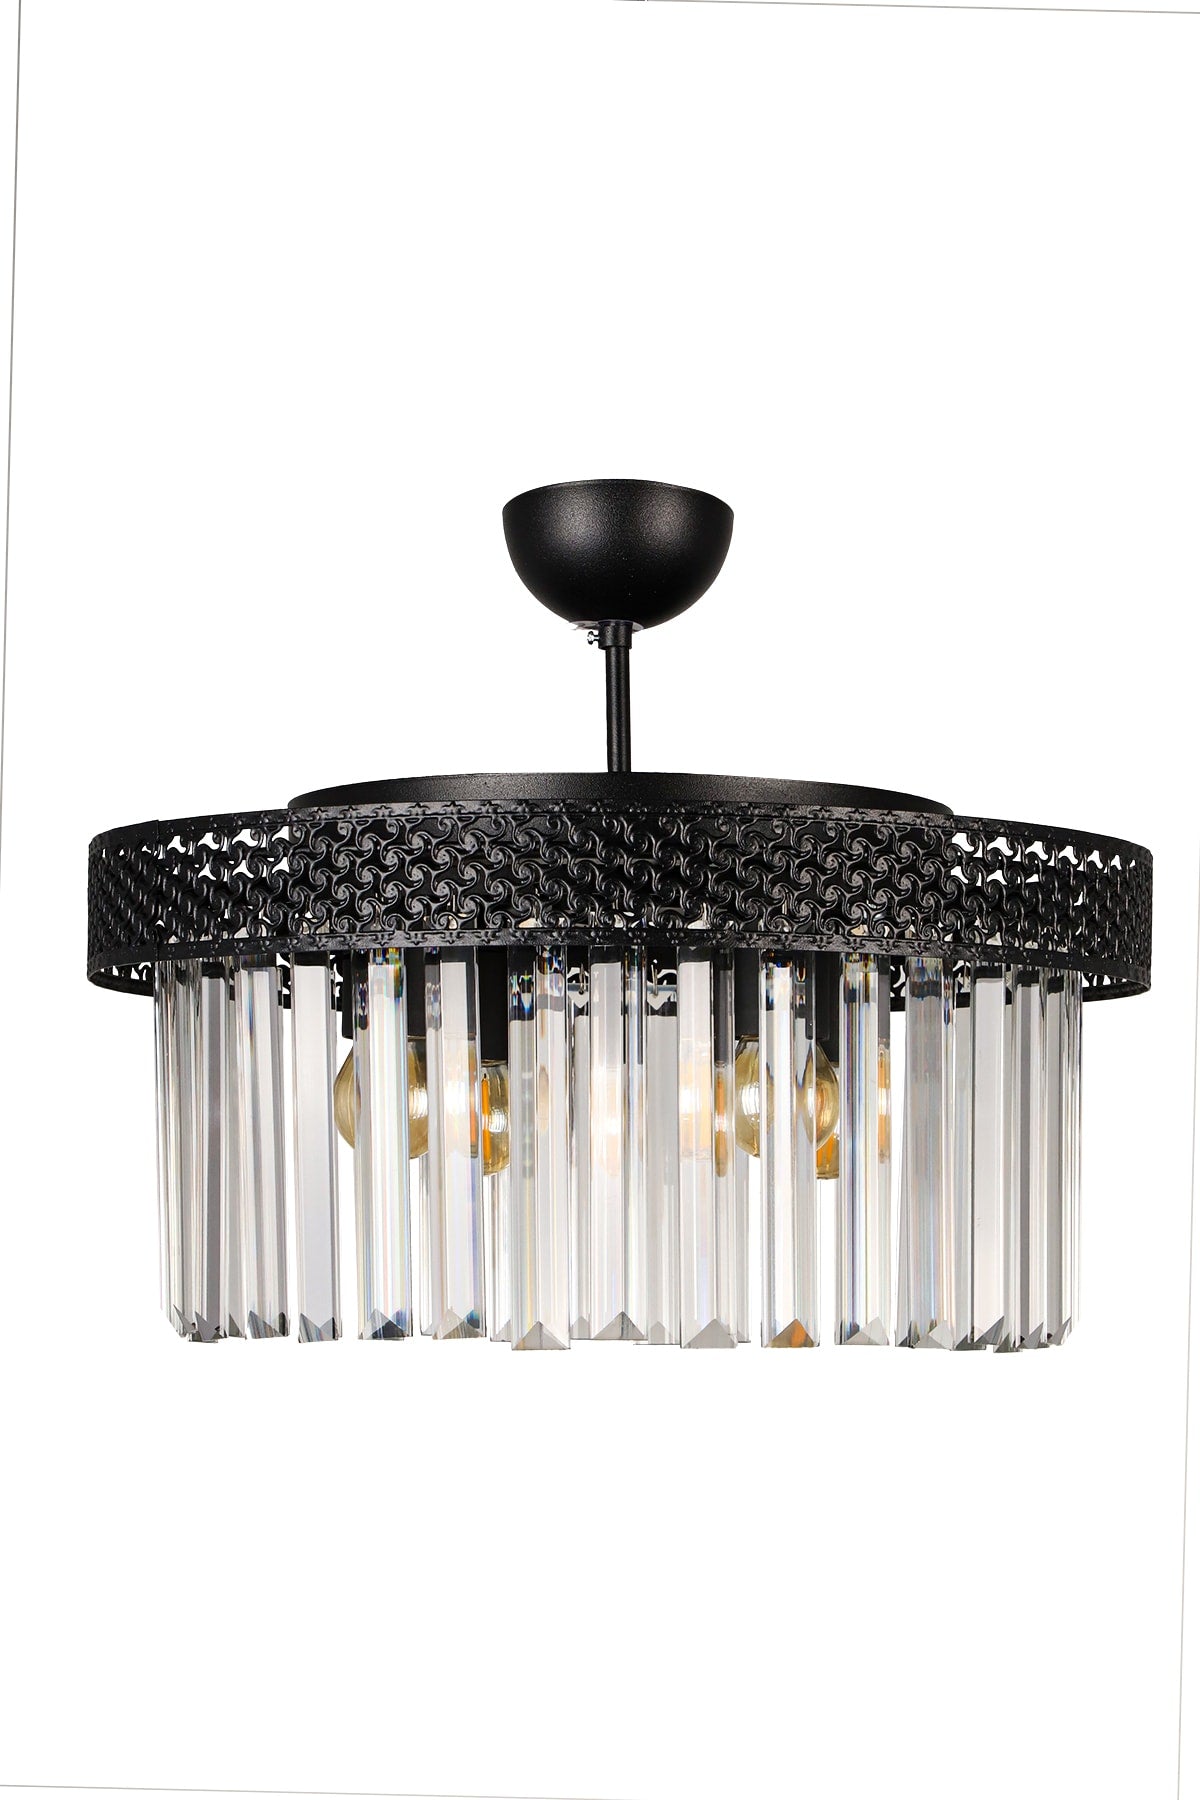 Sitrus 4th Black Lux Crystal Stone Chandelier